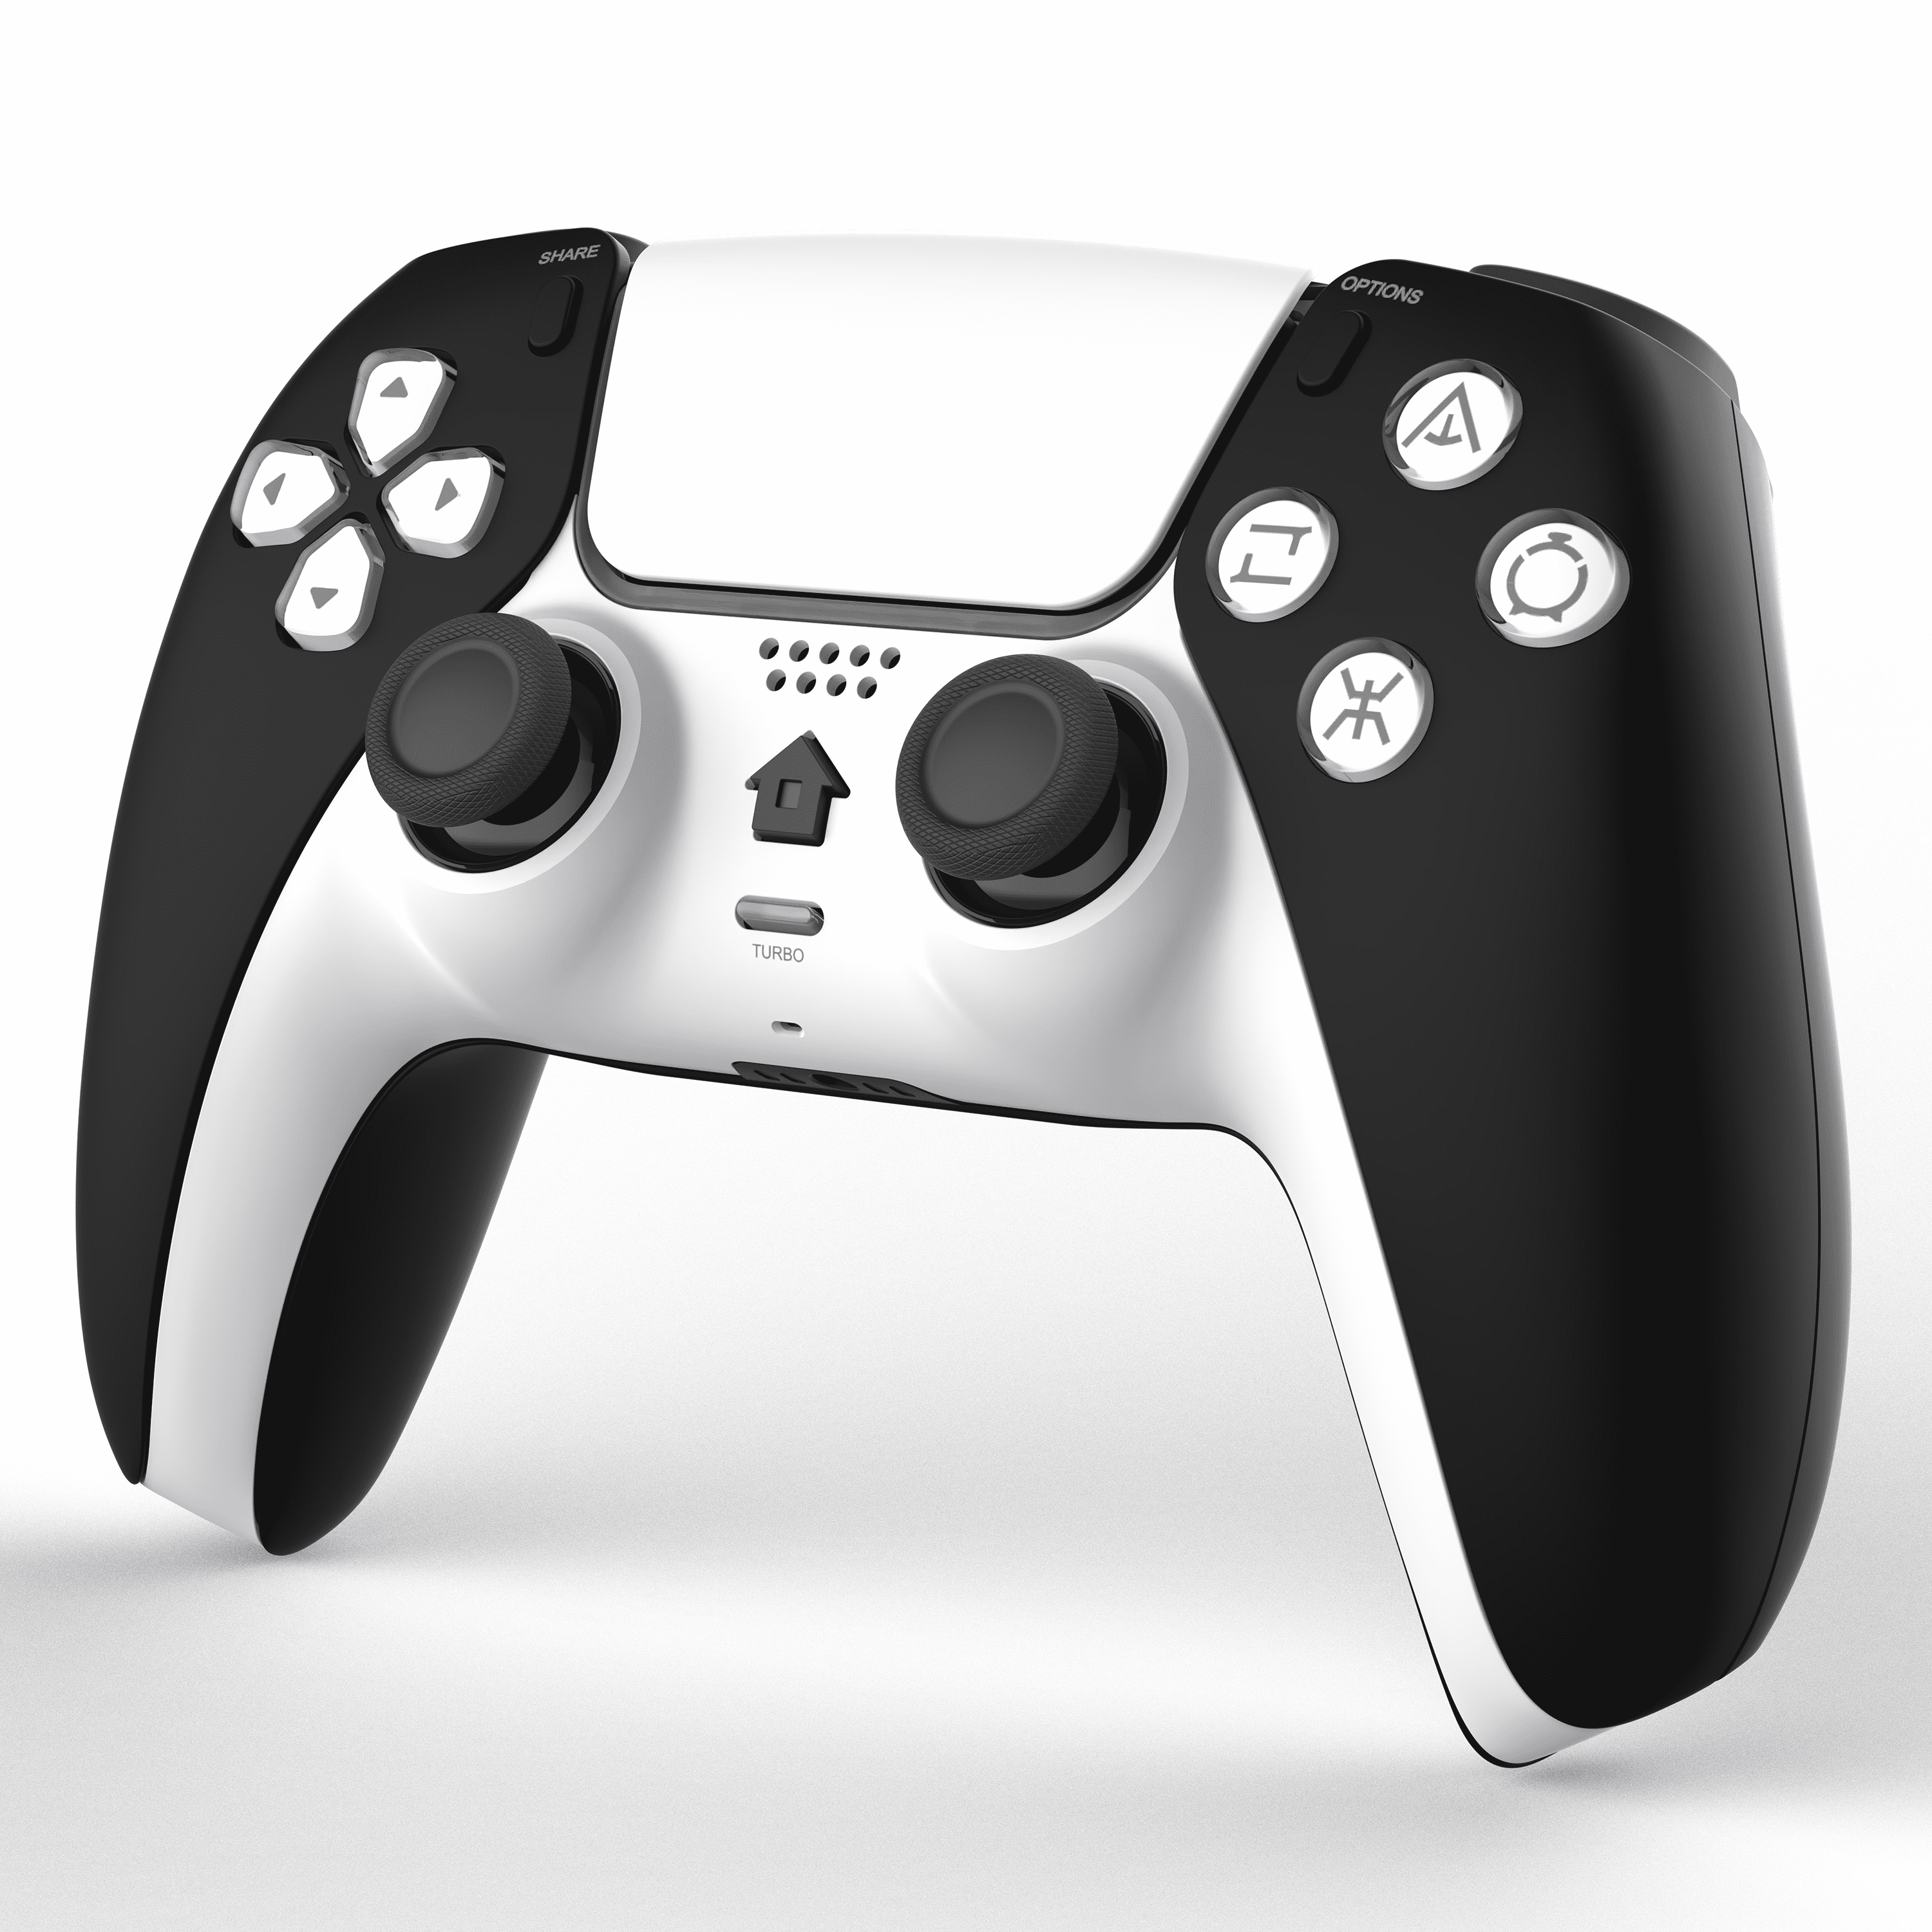 Wireless Controller for PS-4 Gamepad Joystick with Dual Vibration/six-axis gyro Sensor/Audio Jack/Speaker/LED Indicator/USB Cable New Launch 2021 Game Remote for PS-4/Pro/Slim 